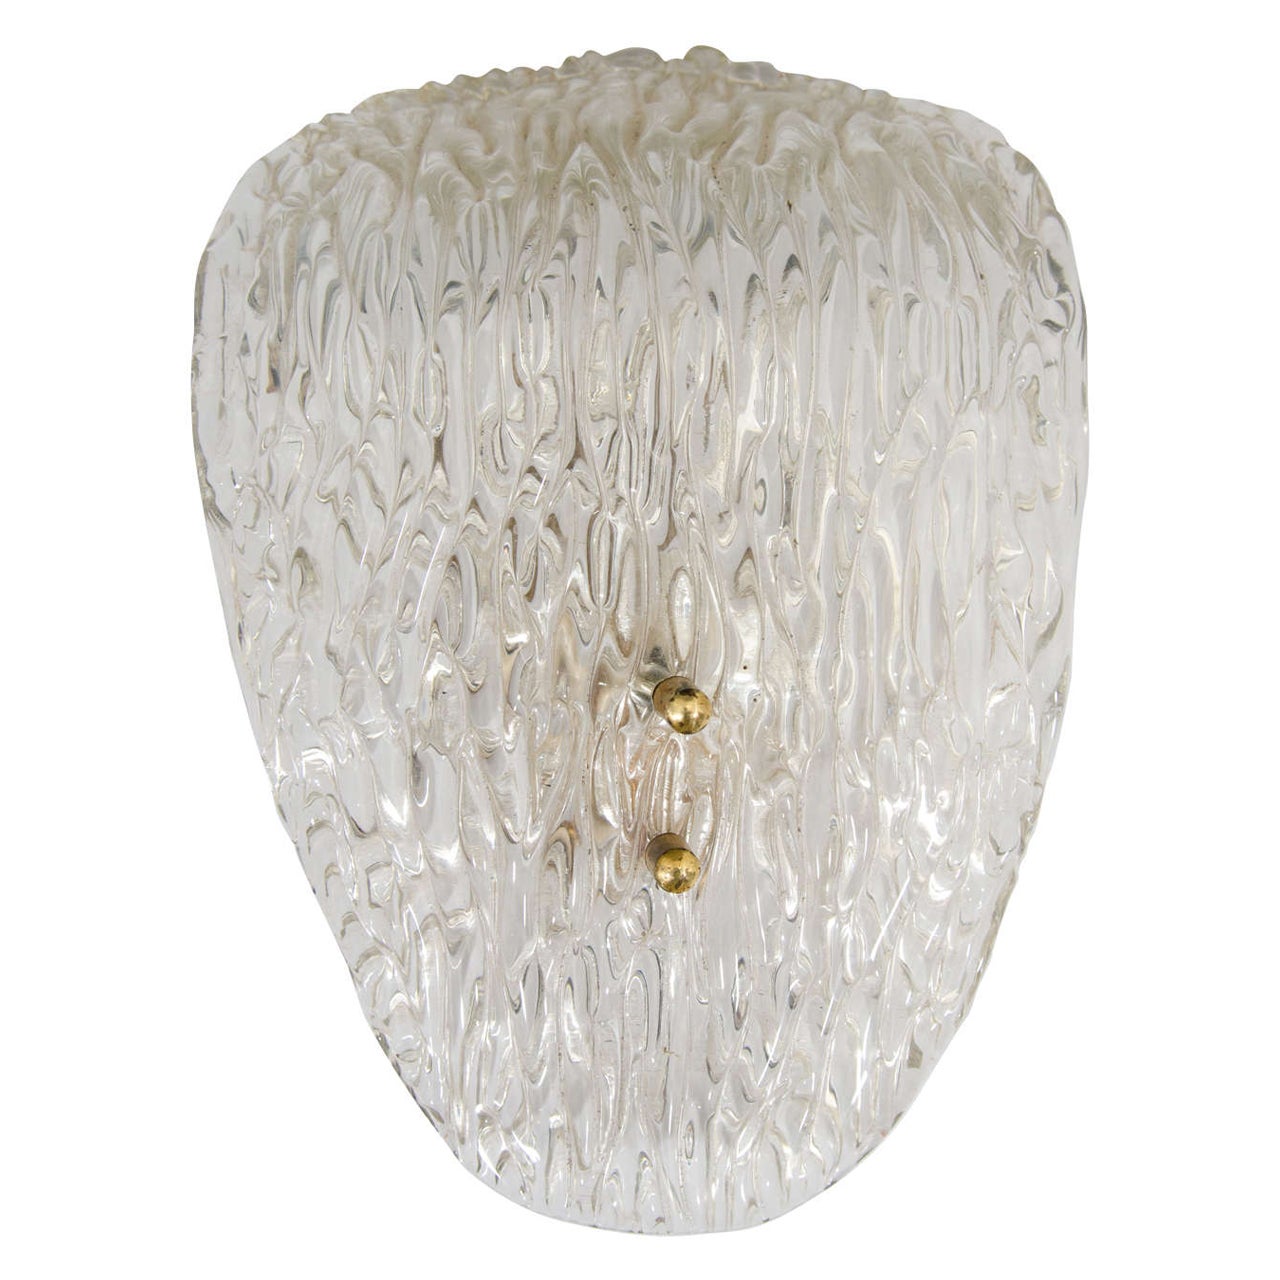 Scandinavian Modern Glass and Brass Wall Sconce by Carl Fagerlund for Orrefors